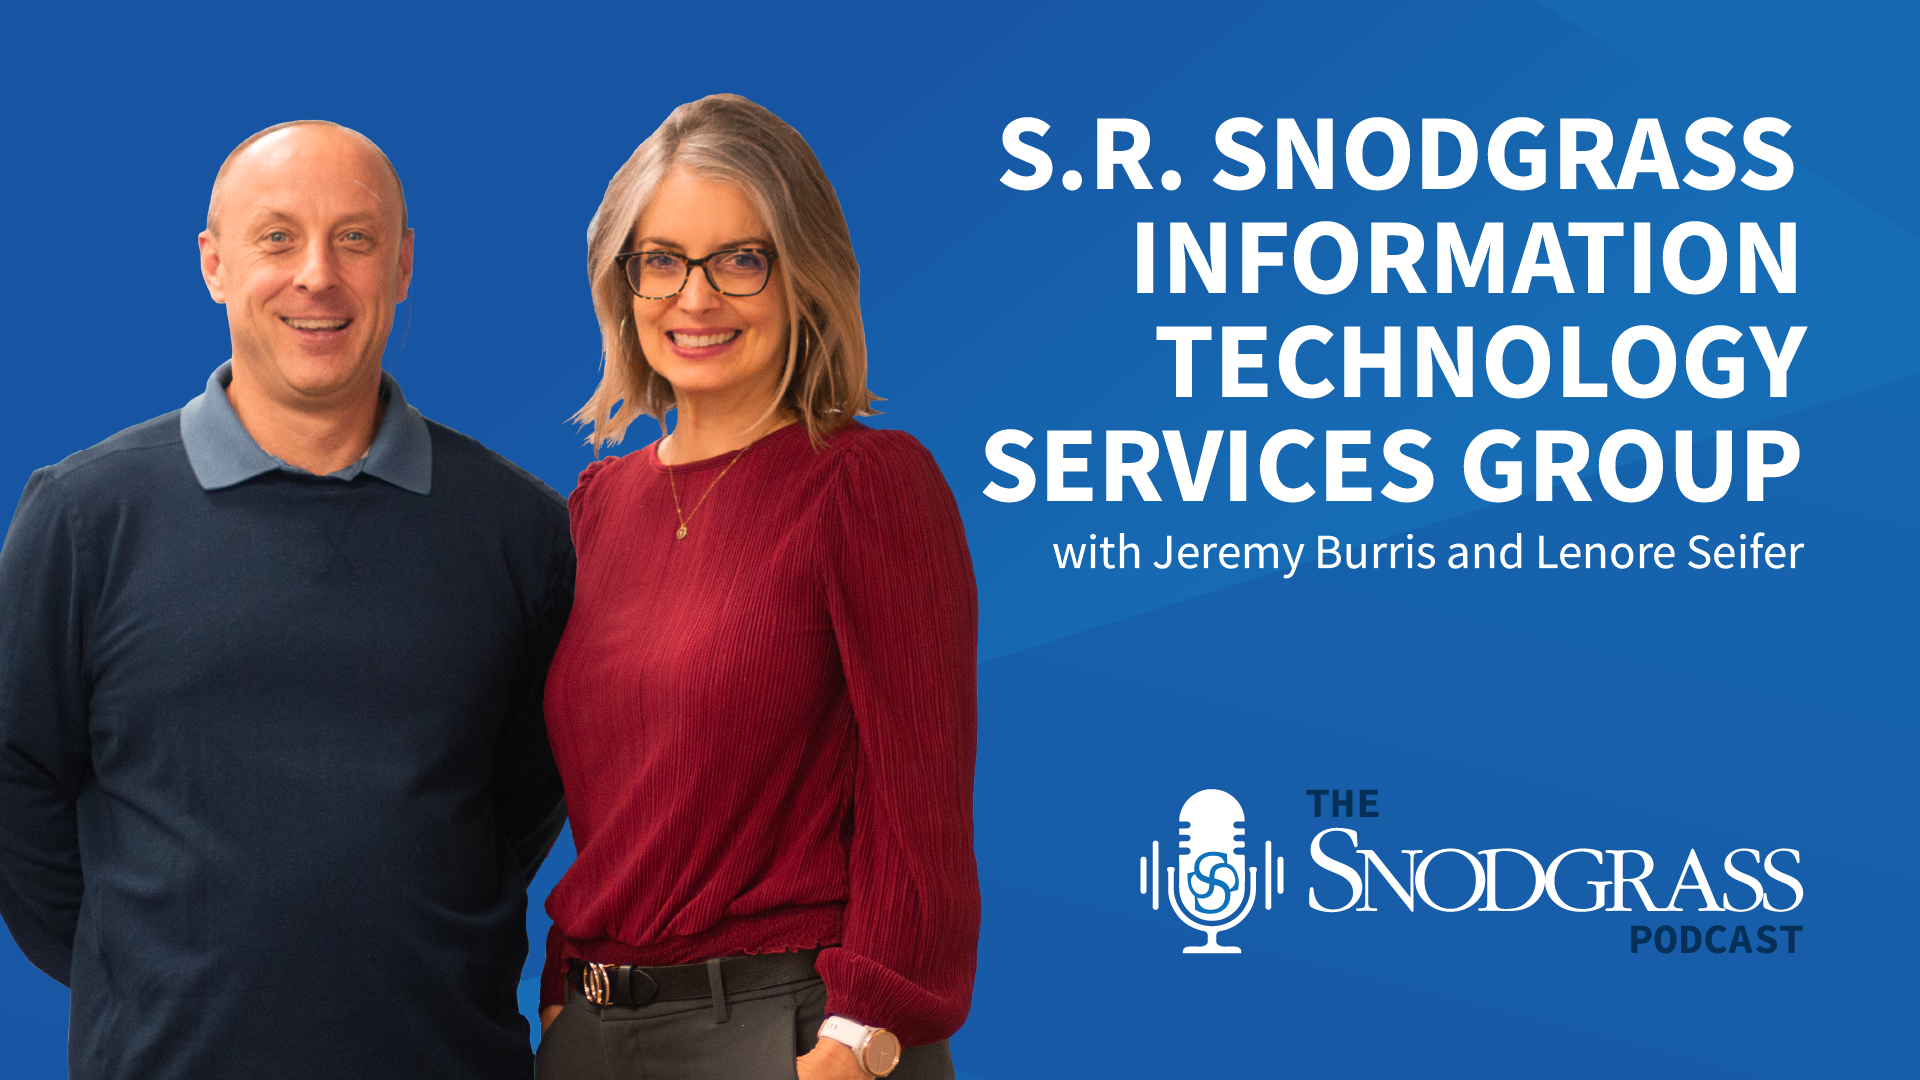 S.R. Snodgrass Information Technology Services Group | S.R. Snodgrass Podcast | Ep 3